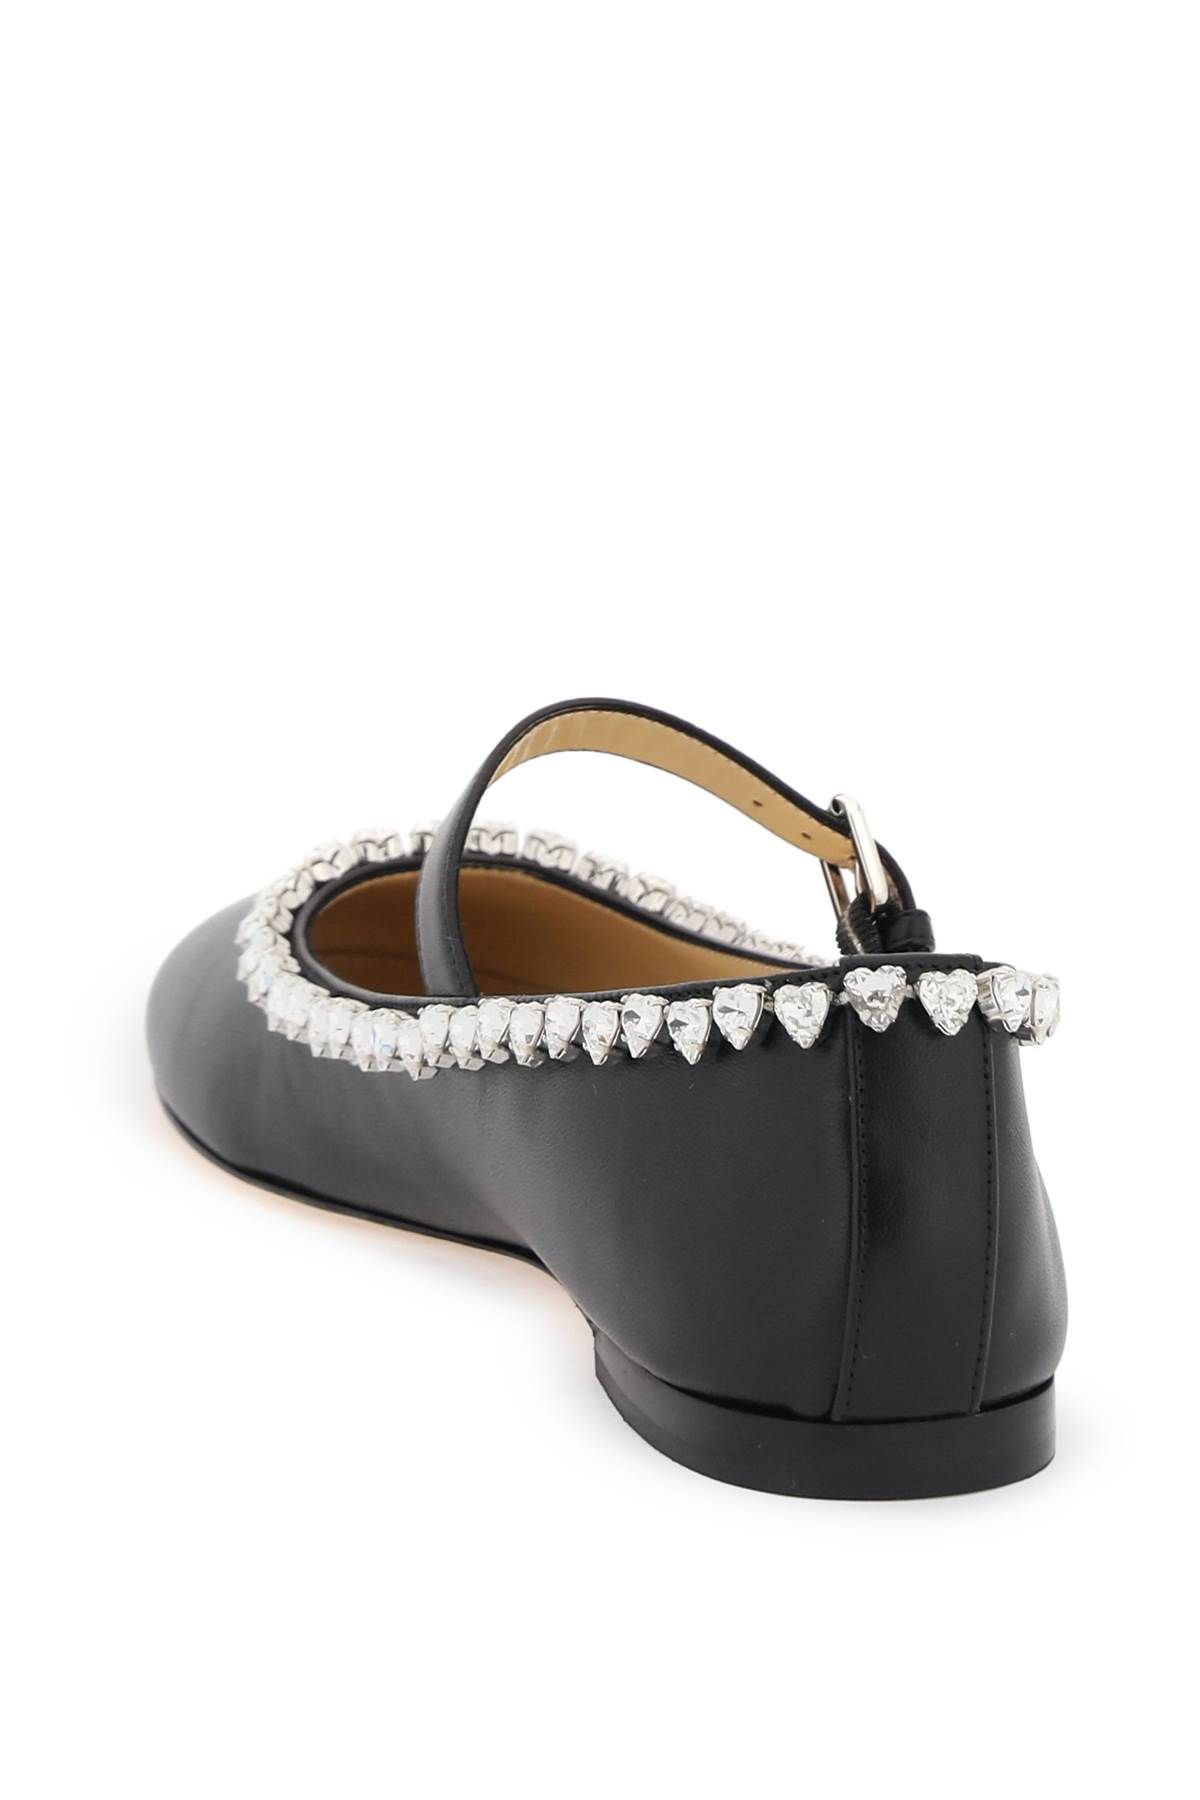 Shop Mach & Mach Audrey Ballet Flats With Heart-shaped Crystals In Black